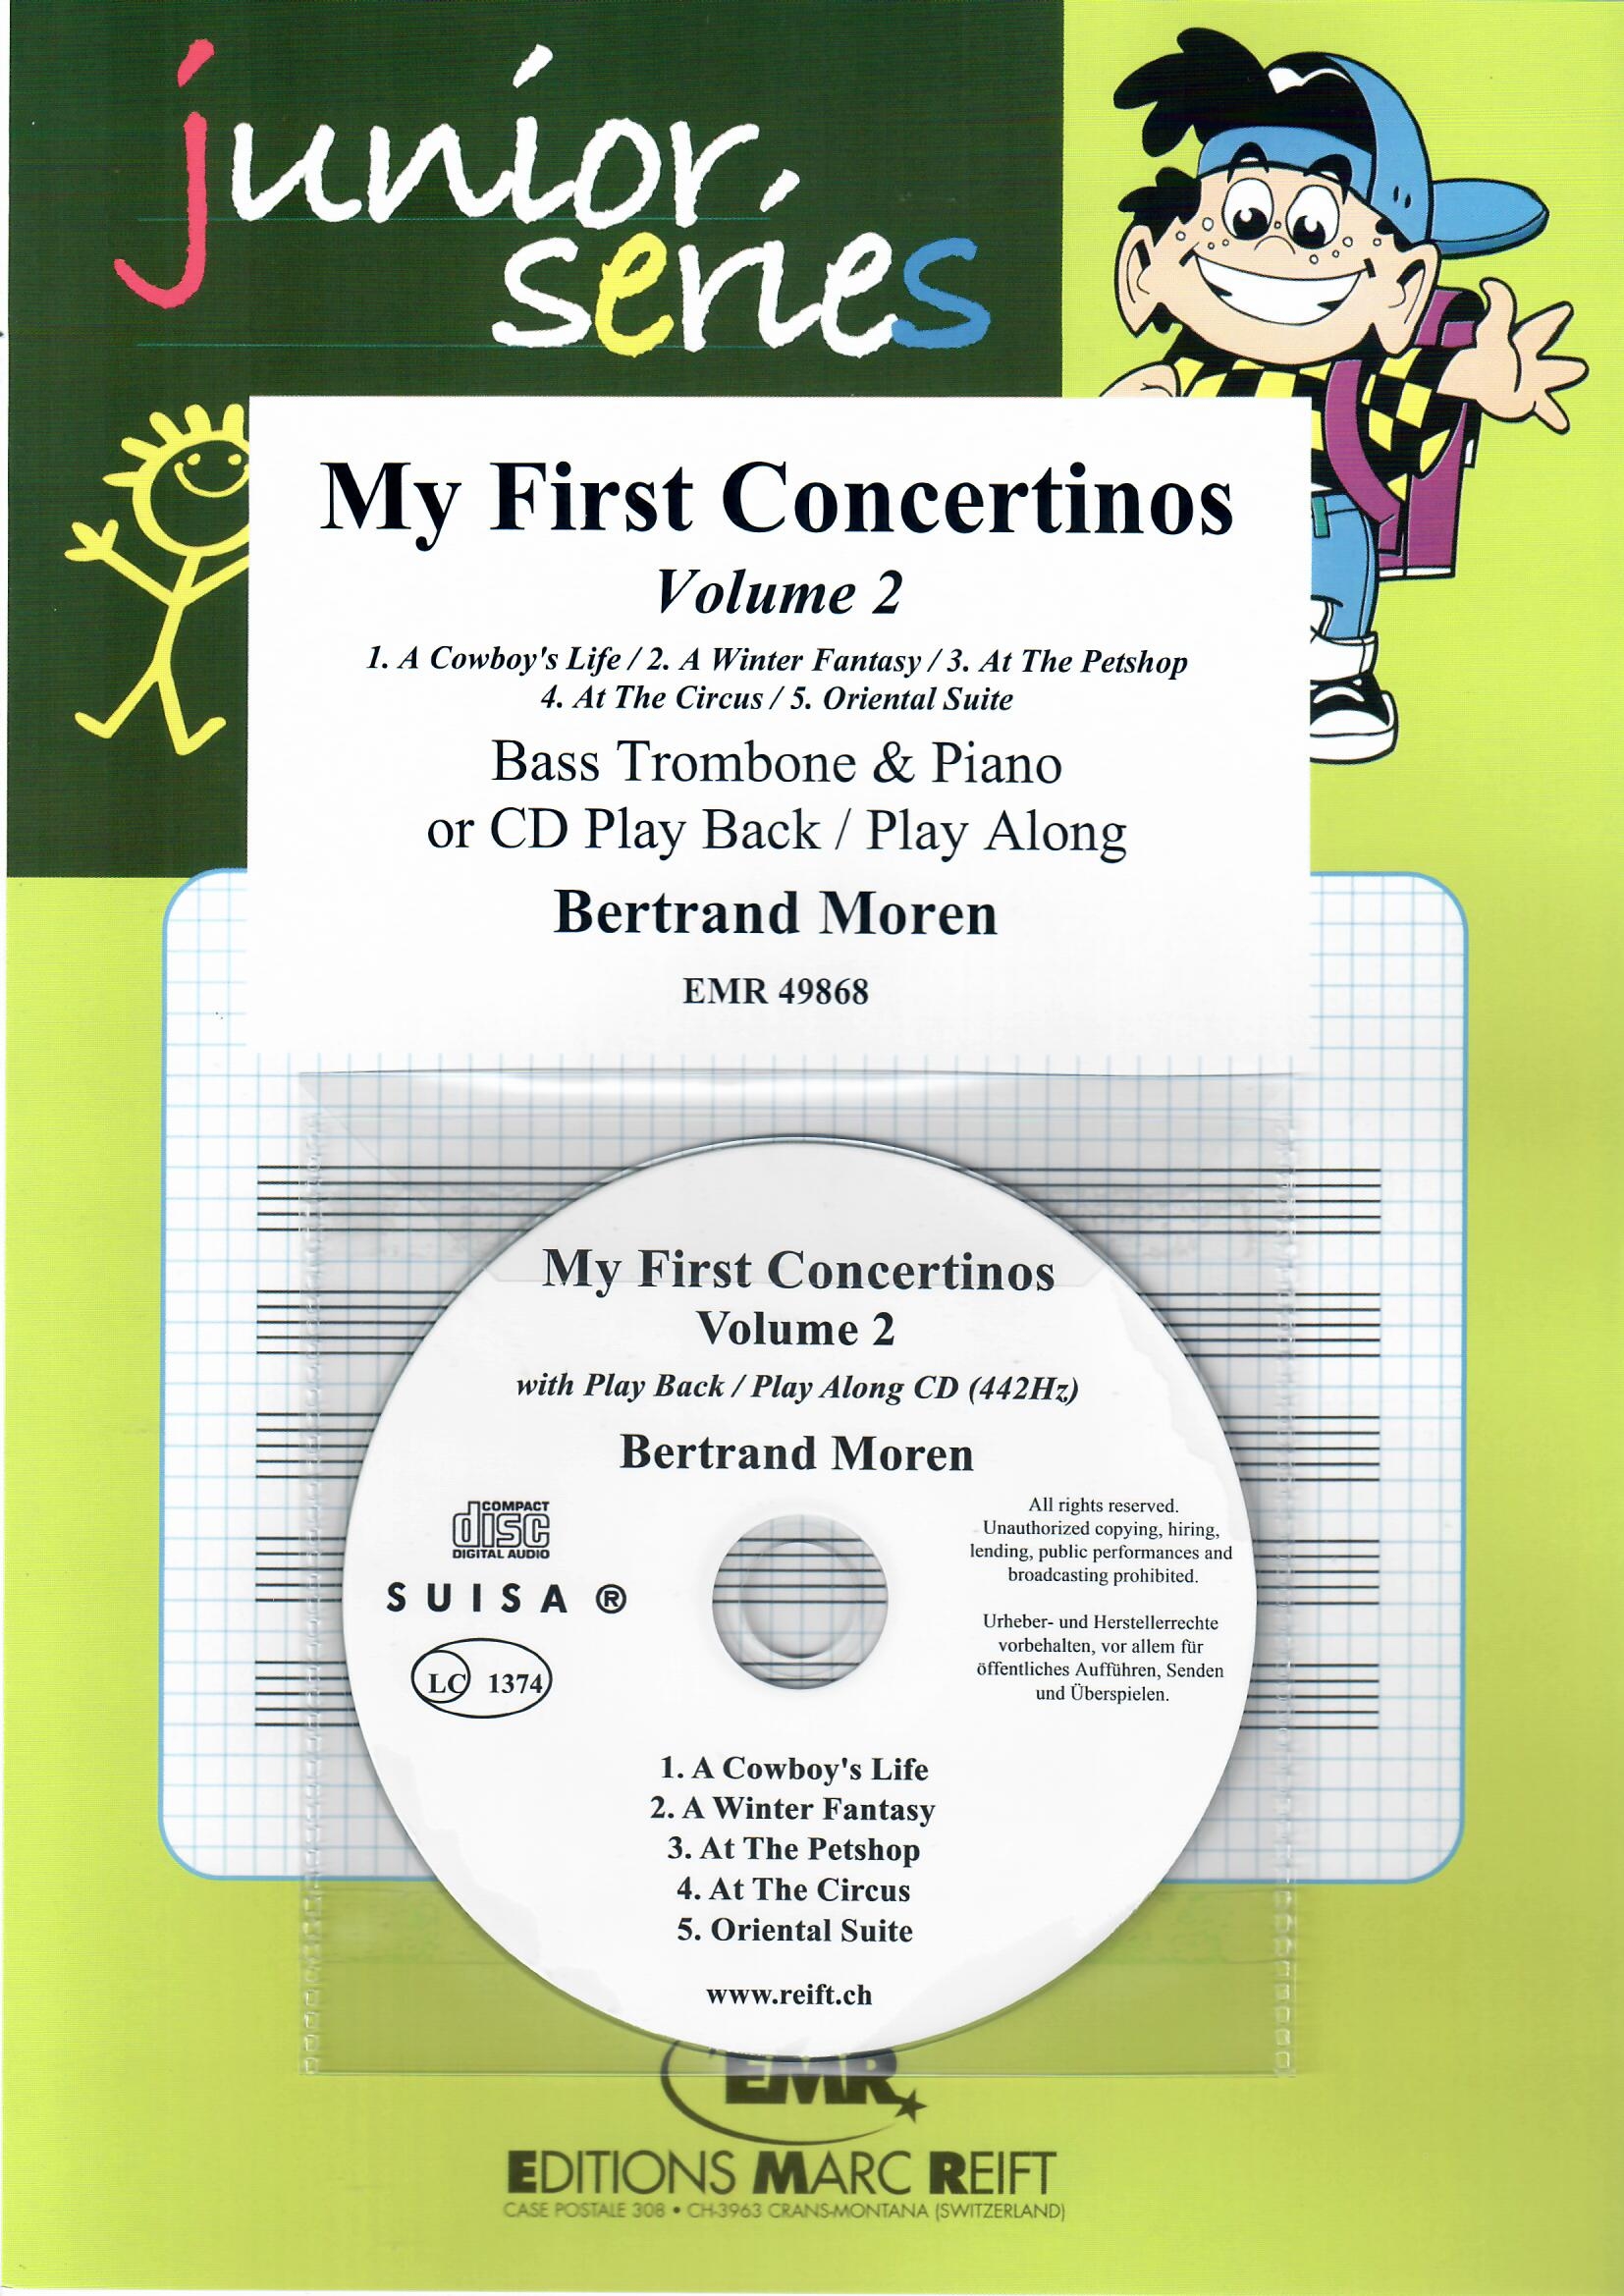 MY FIRST CONCERTINOS VOLUME 2 - Bass Trombone & Piano, BOOKS with CD Accomp., SOLOS for Bass Trombone